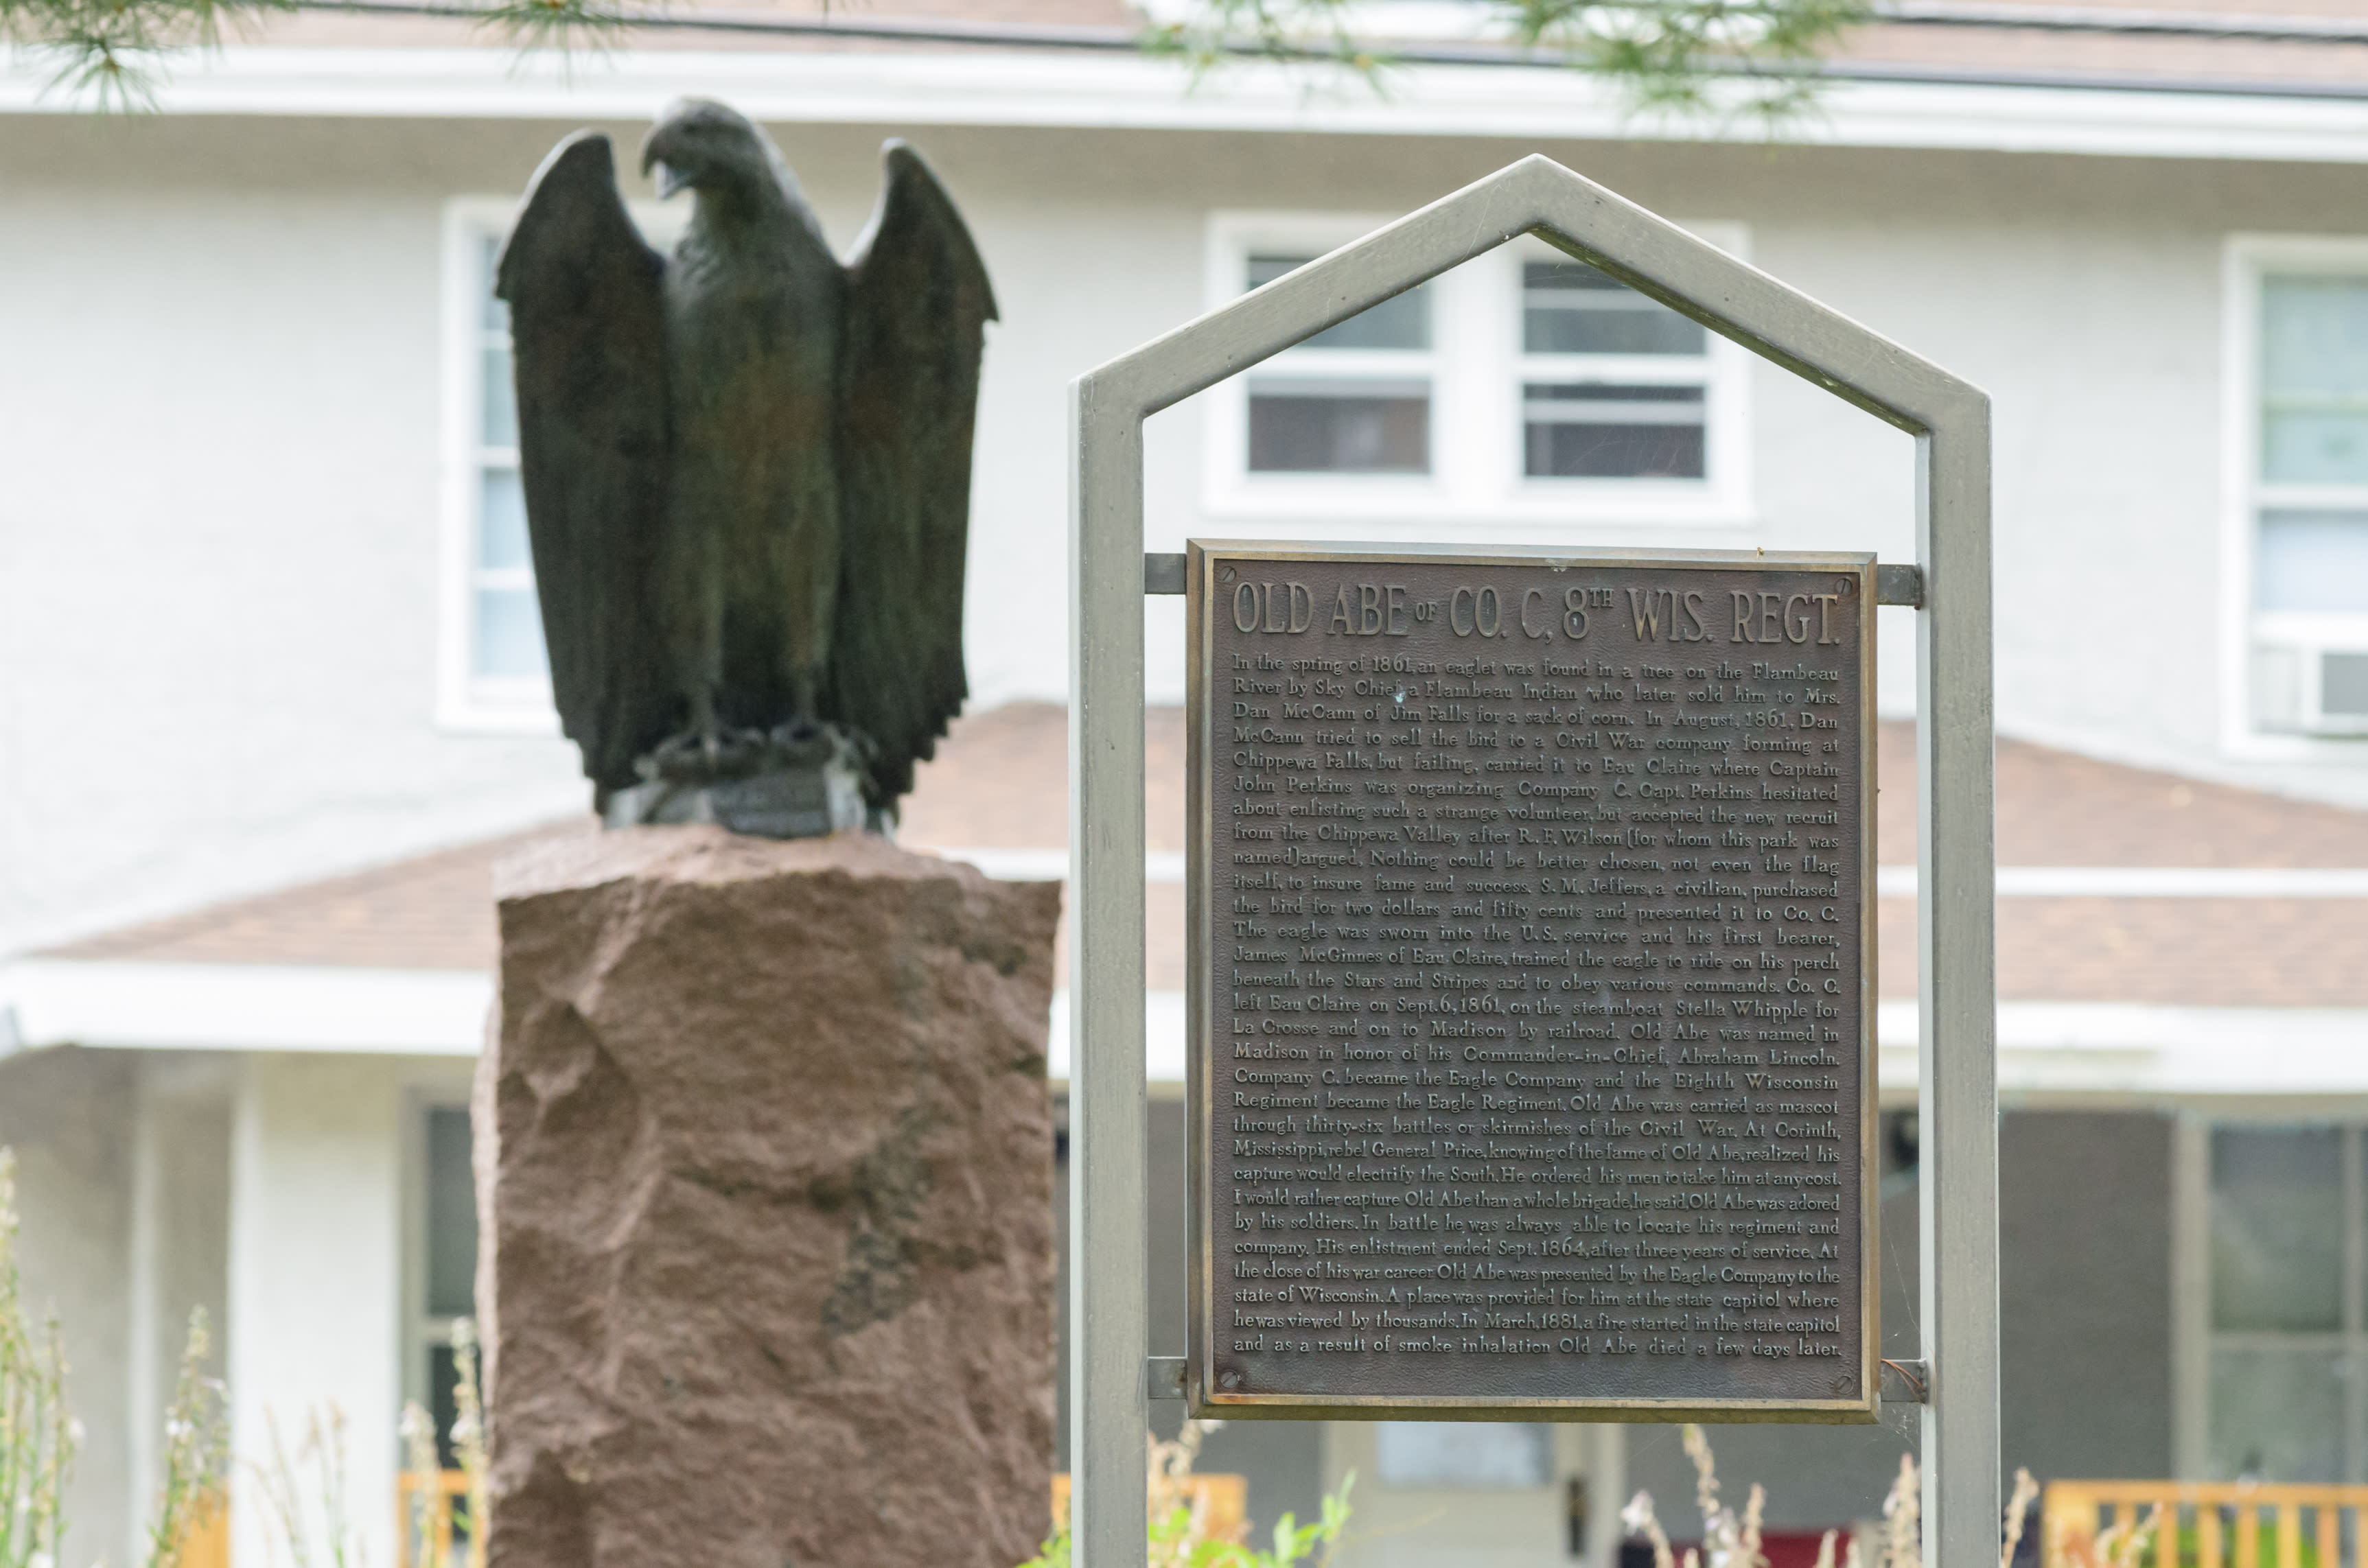 A statue of Old Abe and a historic marker about the eagle stand in downtown Eau Claire’s Wilson Park. Photo by Lee Butterworth/Volume One